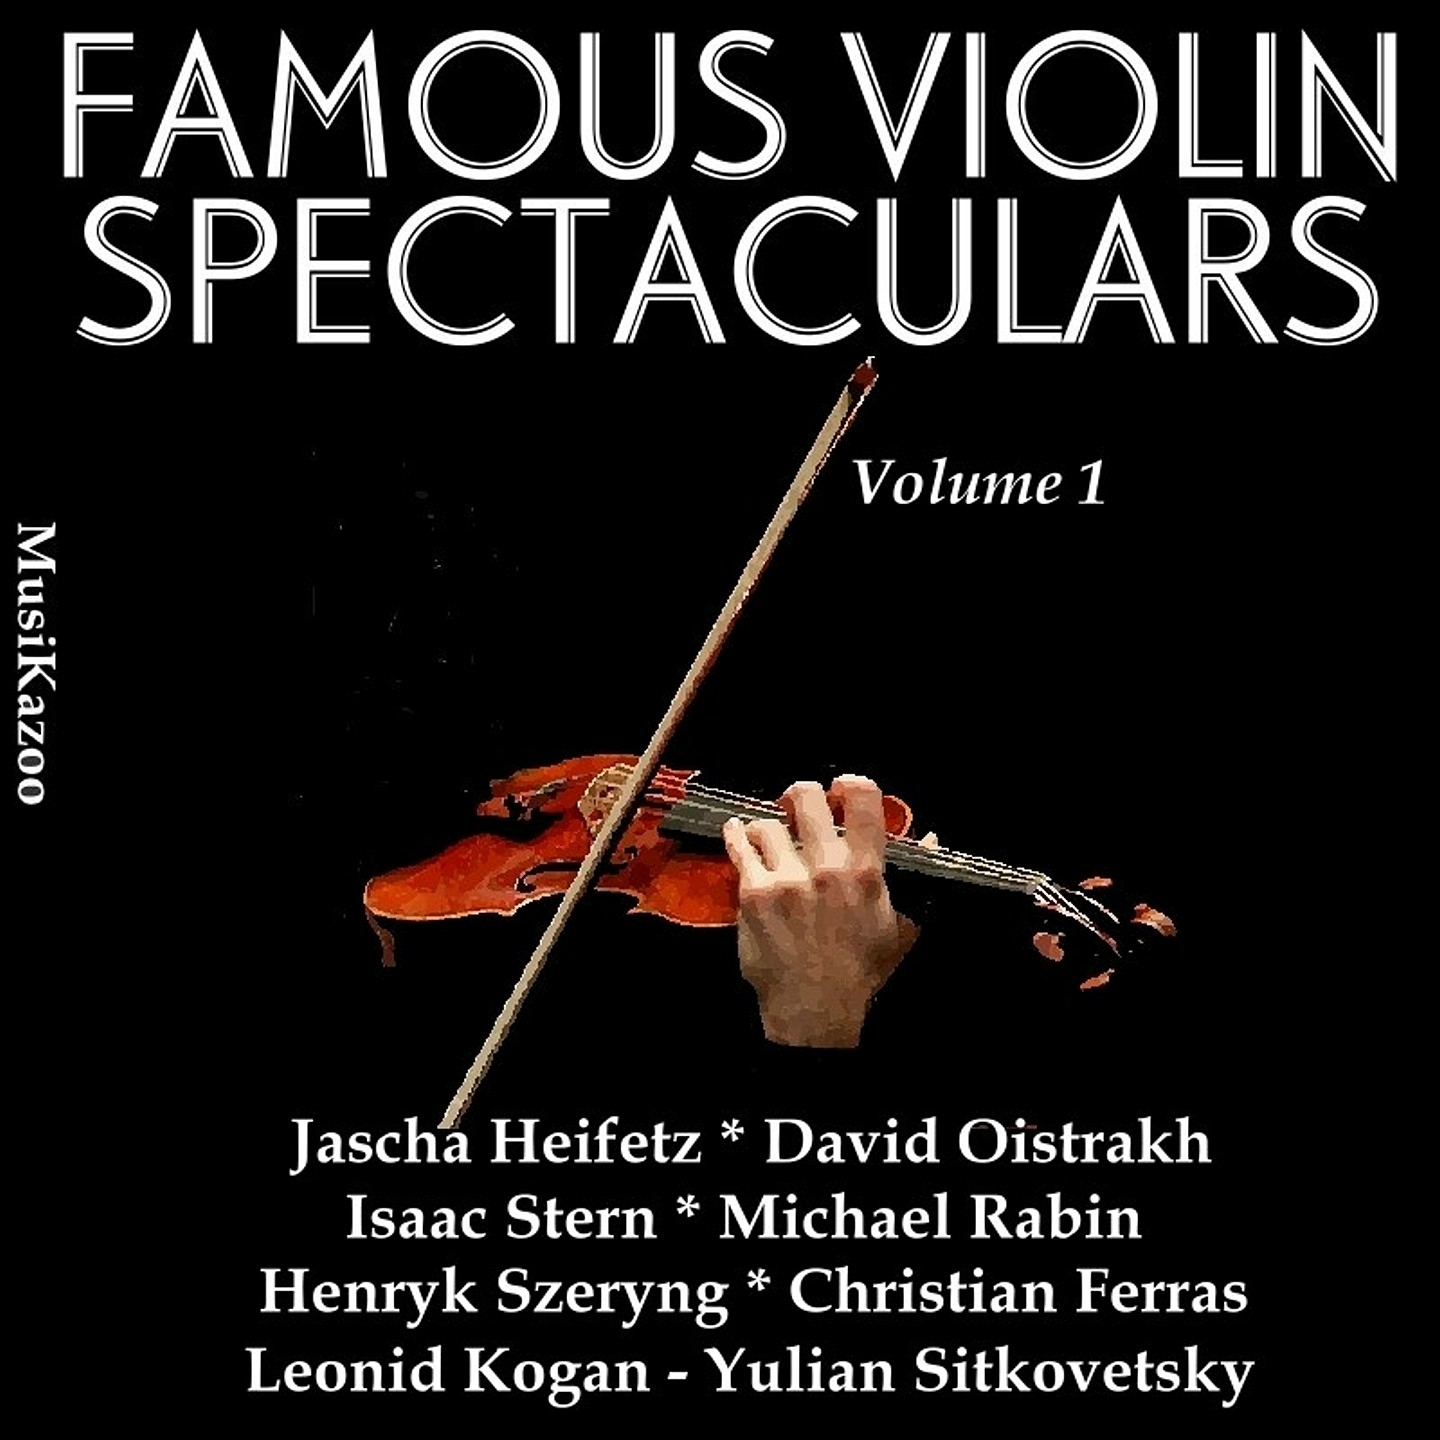 Famous Violin Spectaculars